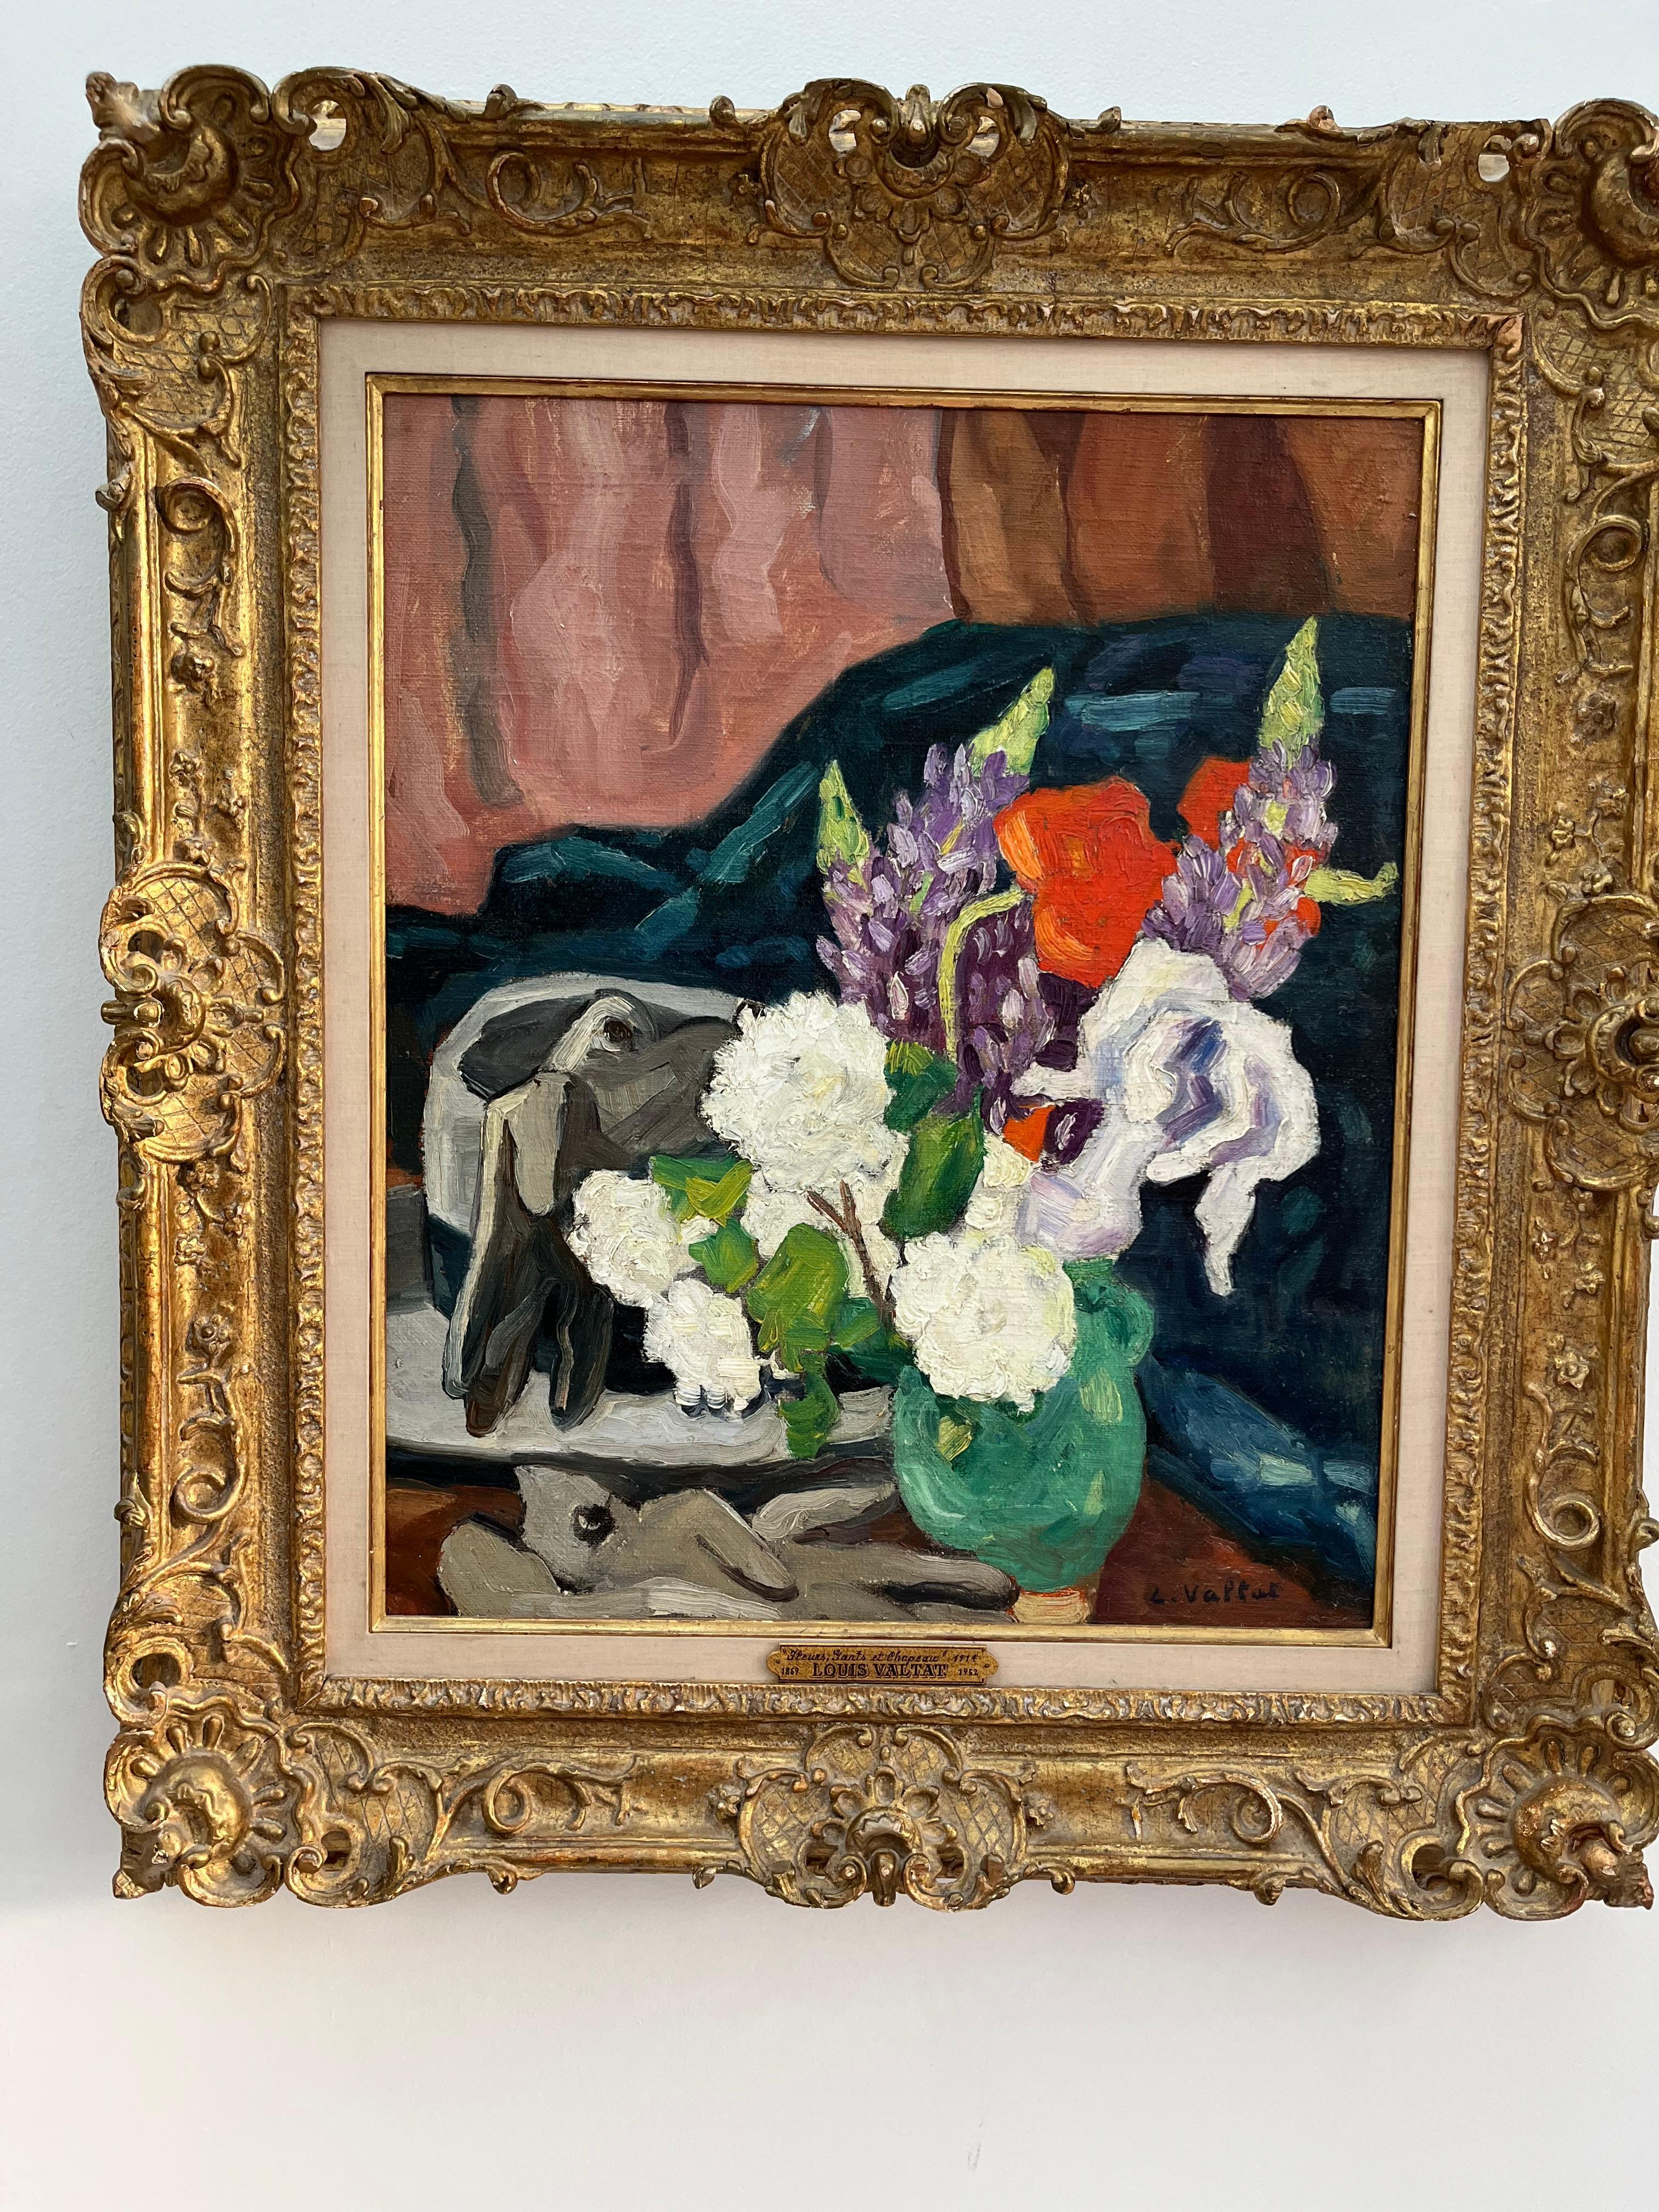 Bouquet with hat, gloves and coat - Painting by Louis Valtat